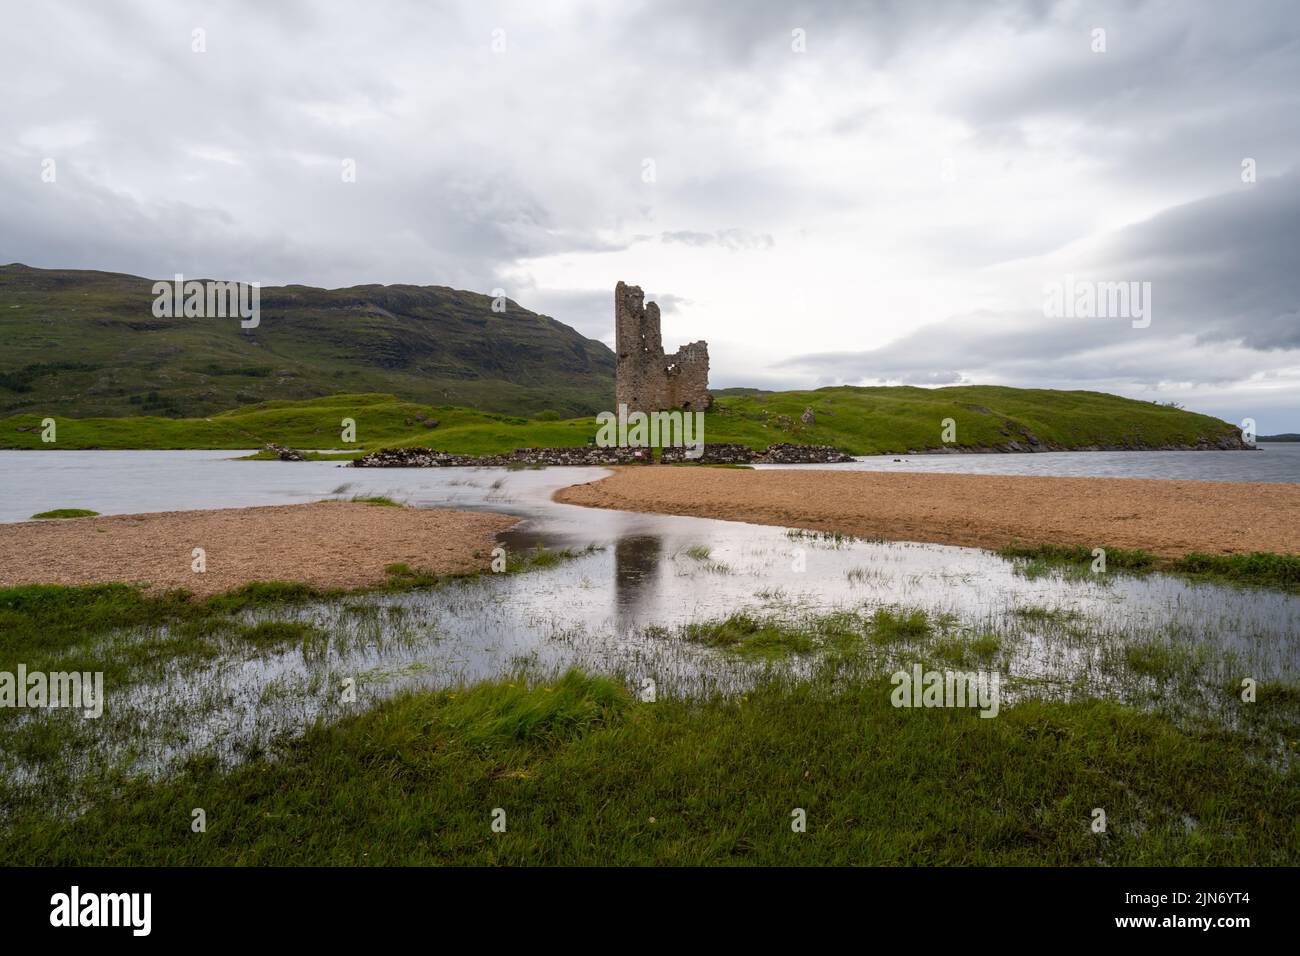 Inchnadamph, United Kingdom - 28 June, 2022: long exposure view of the Ardvreck Castle on Loch Assynt in the Scottish Highlands Stock Photo